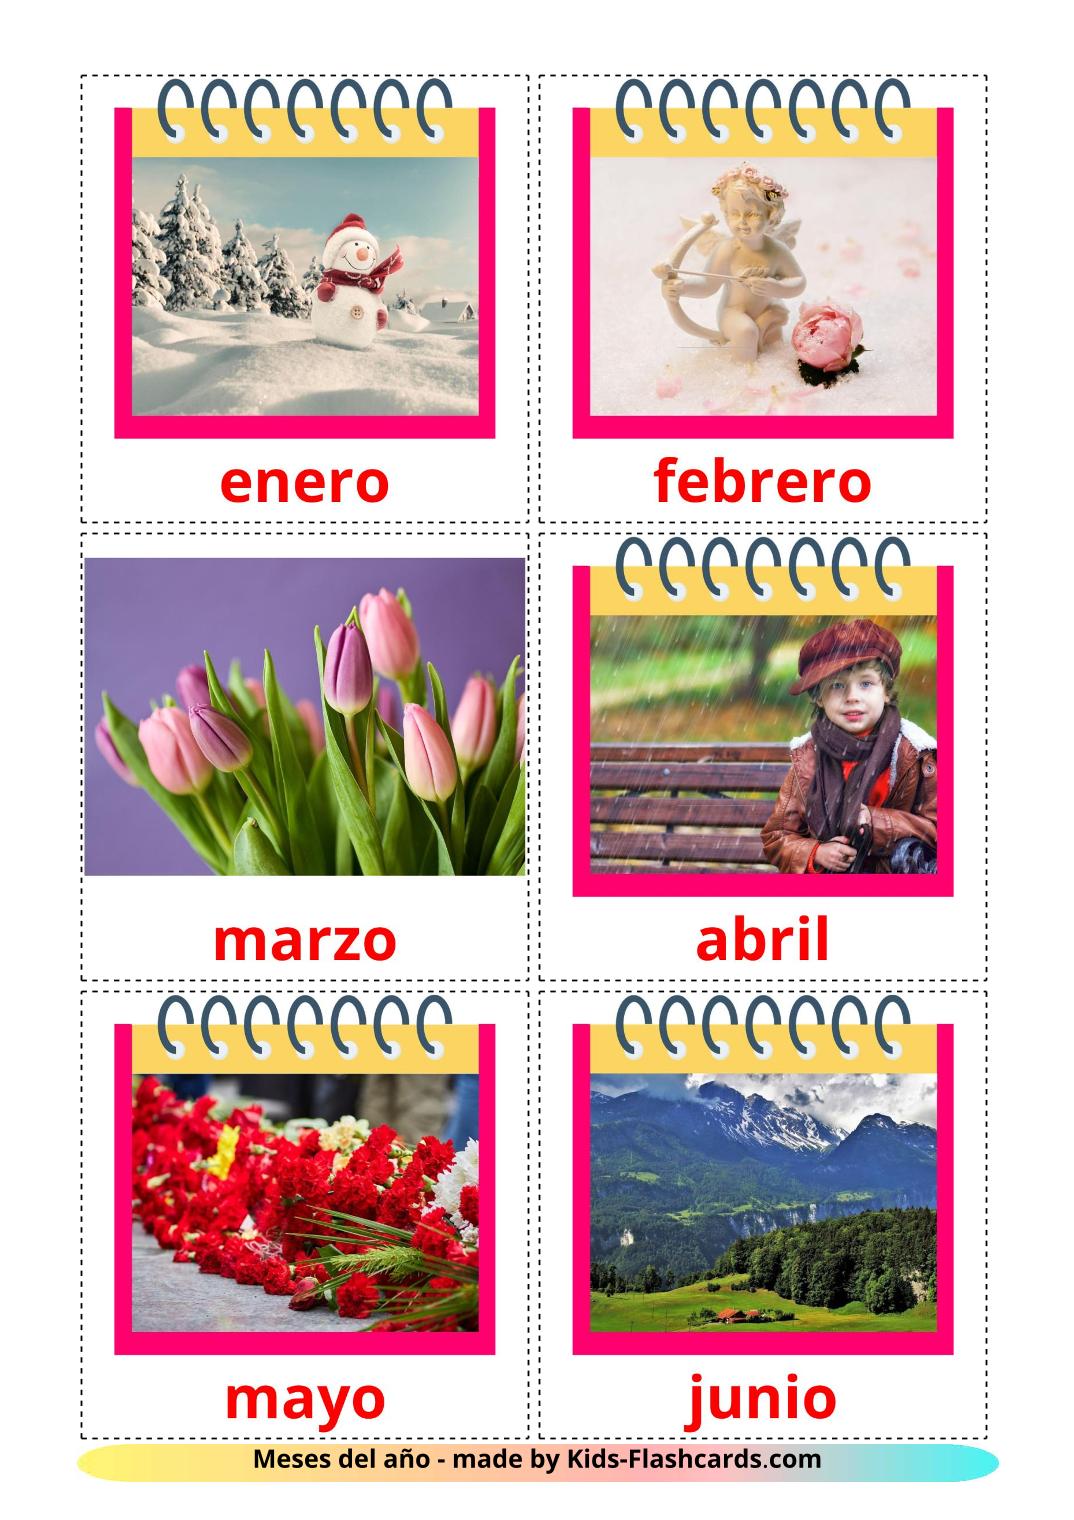 Months of the Year - 12 Free Printable spanish Flashcards 